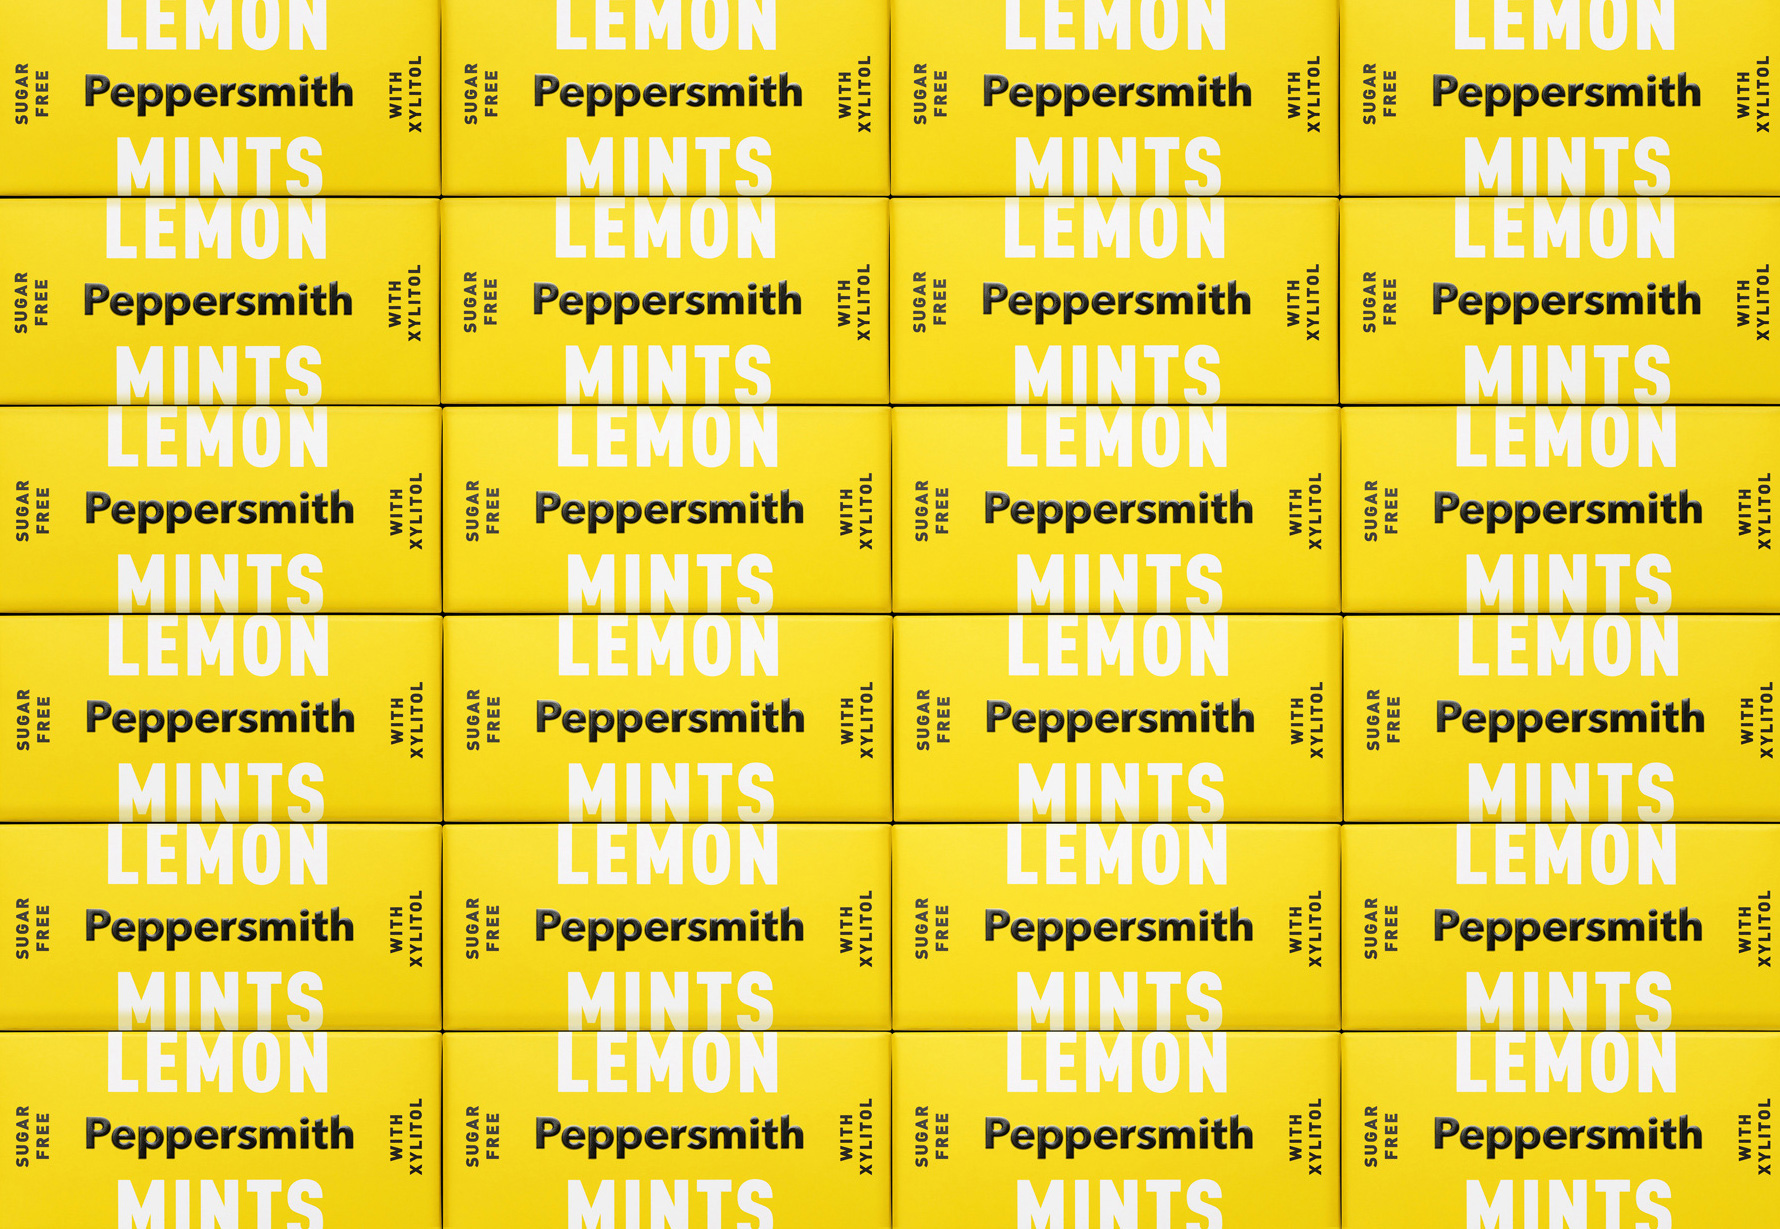 New Logo, Identity, and Packaging for Peppersmith by B&B Studio